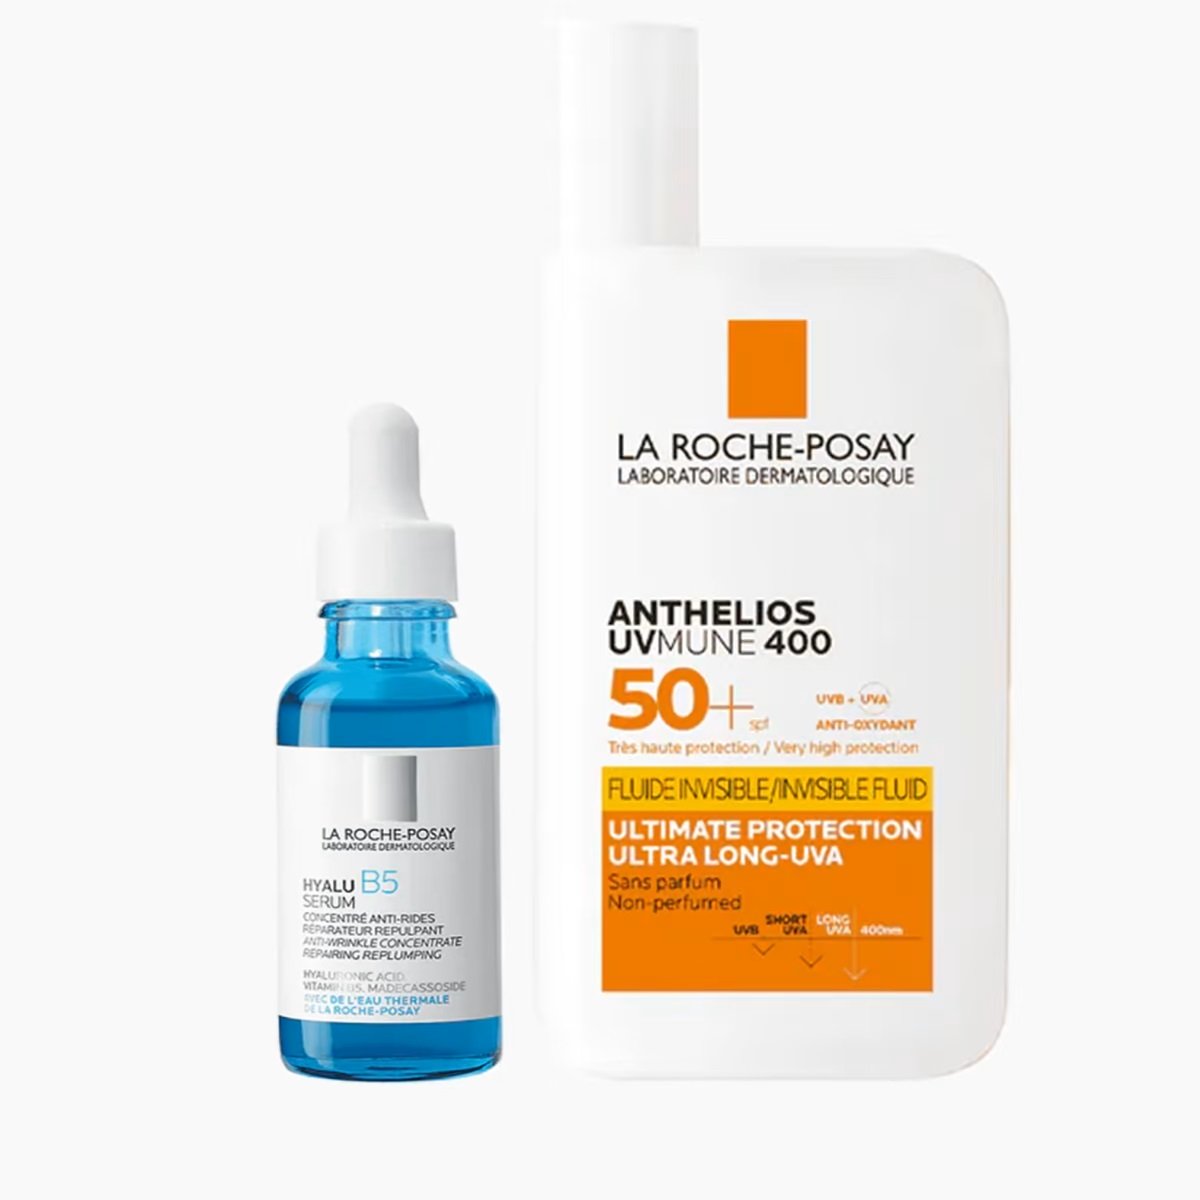 Image of B5 Hyalu Serum + Invisible Fluid SPF50+ Anthelios La Roche Posay